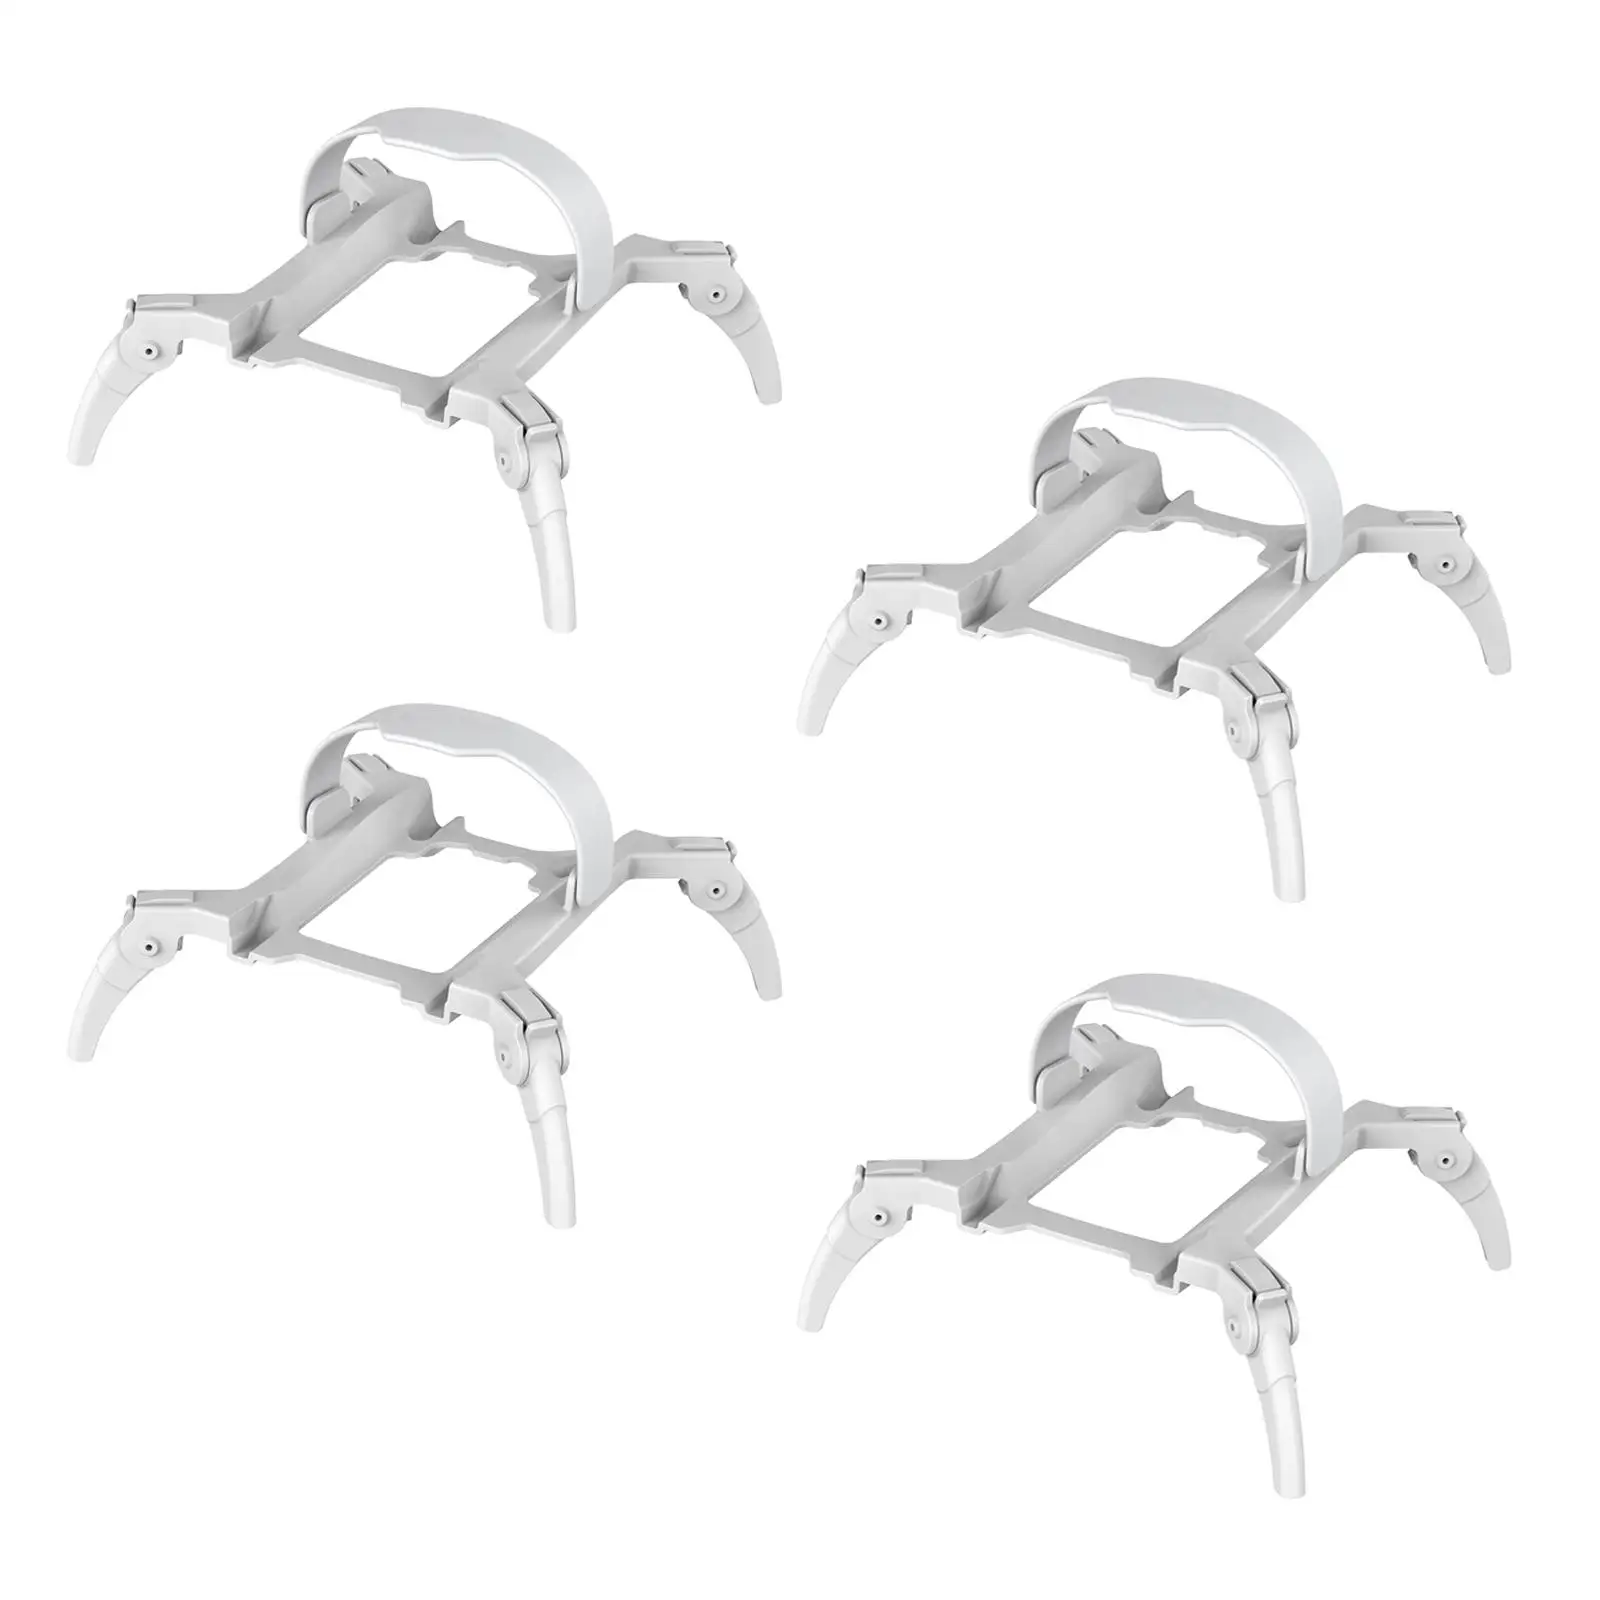 4x RC Foldable Landing Gear Support Legs Extender Protective Quick Release Height Extender for RC Airplane Replacement Parts